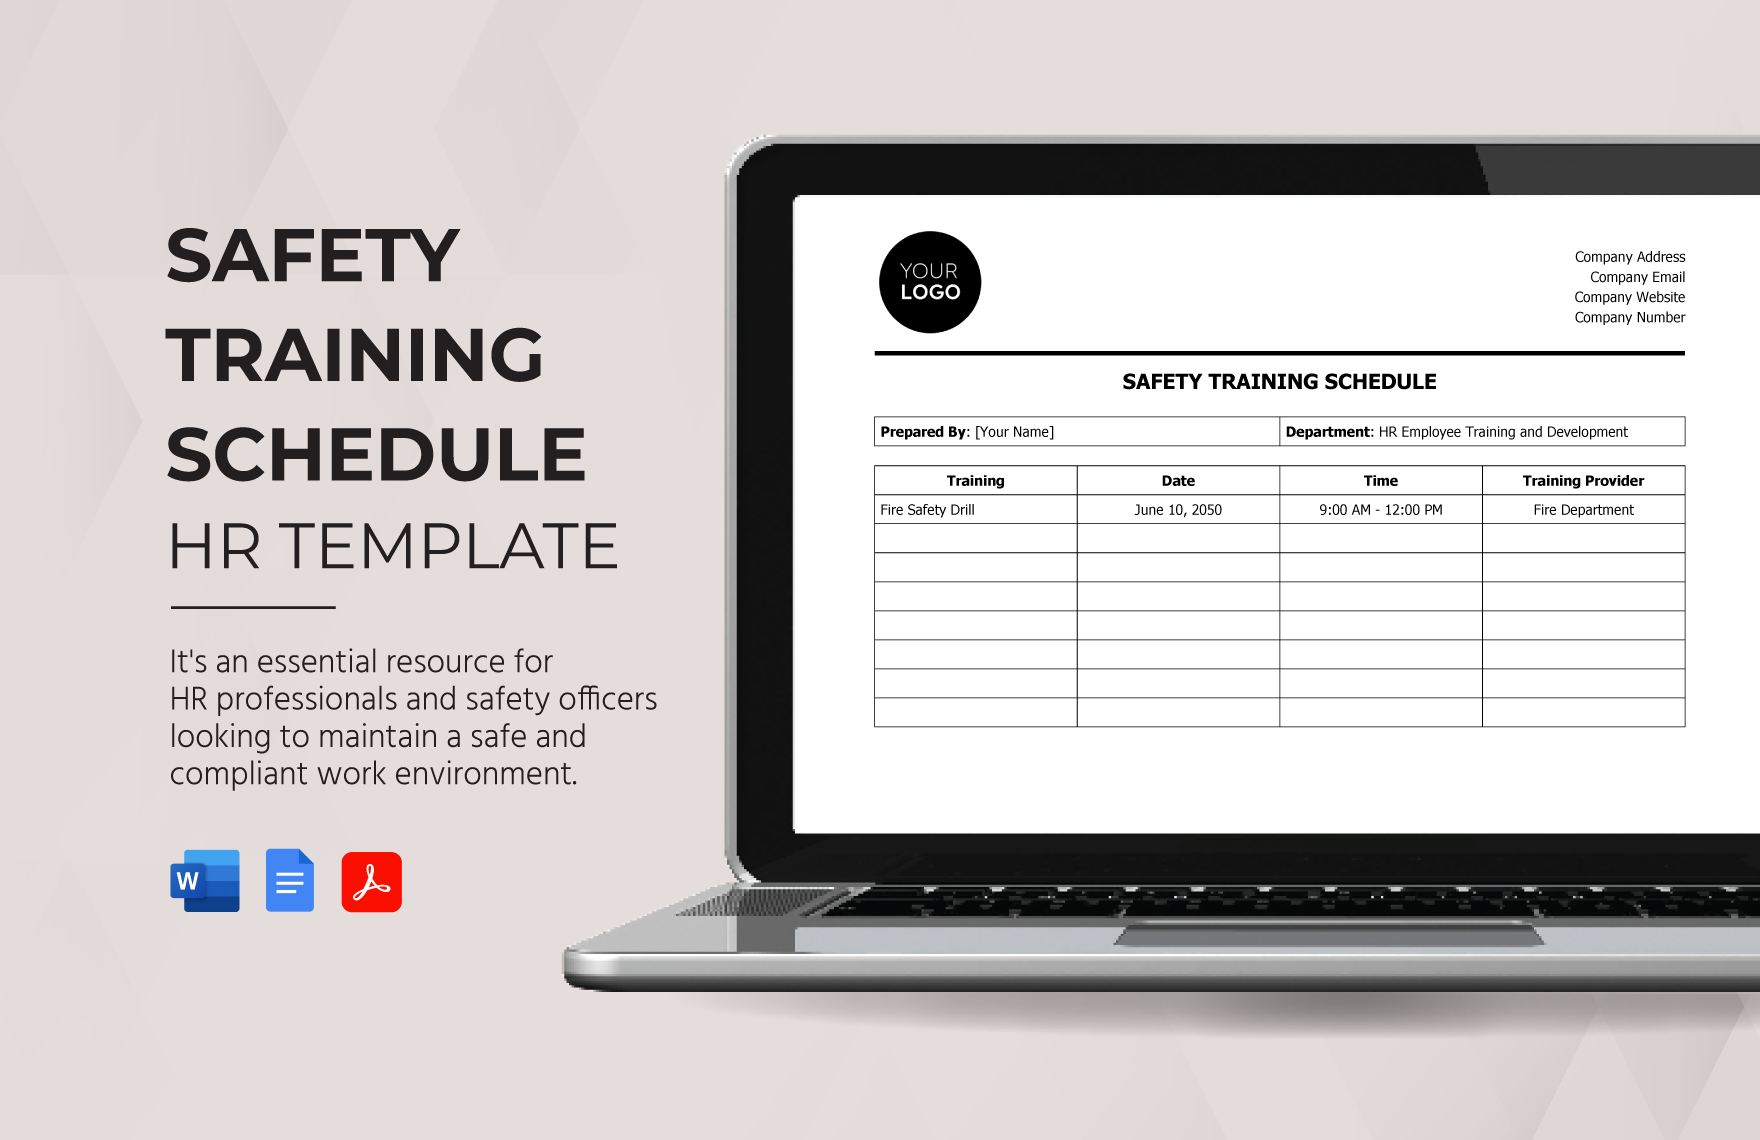 Safety Training Schedule HR Template in Word, Google Docs, PDF